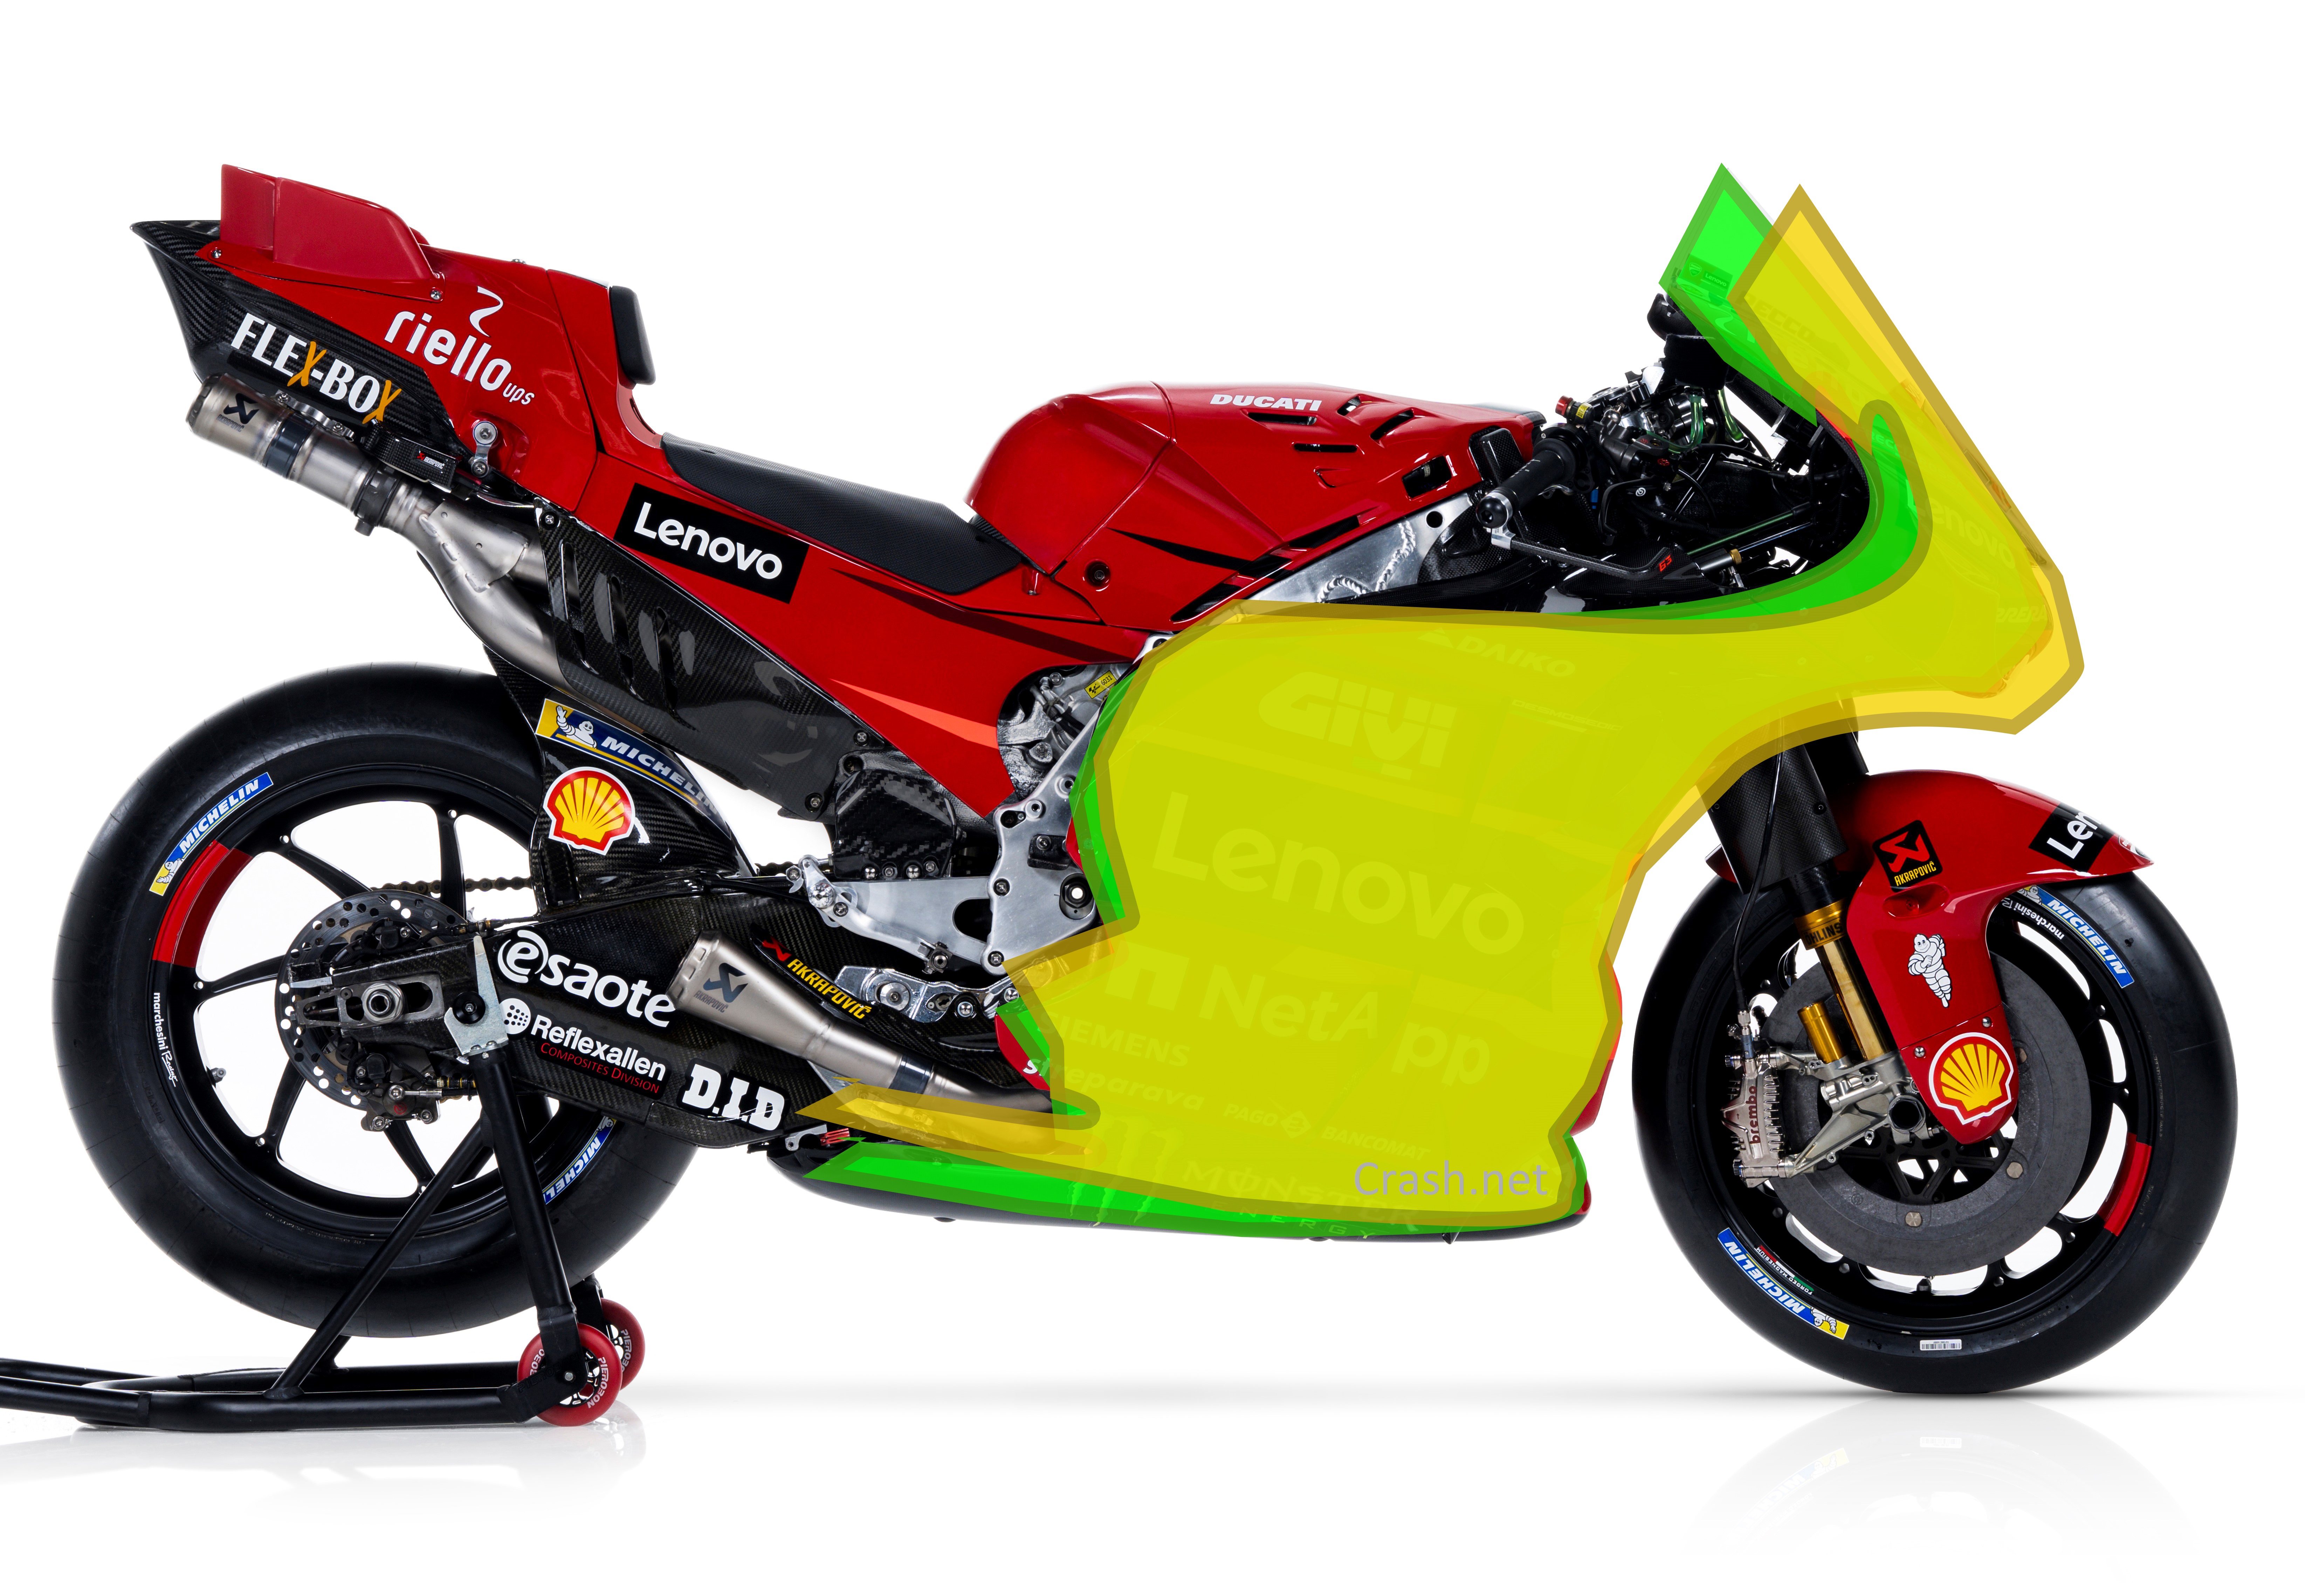 Could MotoGP fairings be mounted on the bike at different angles in future?